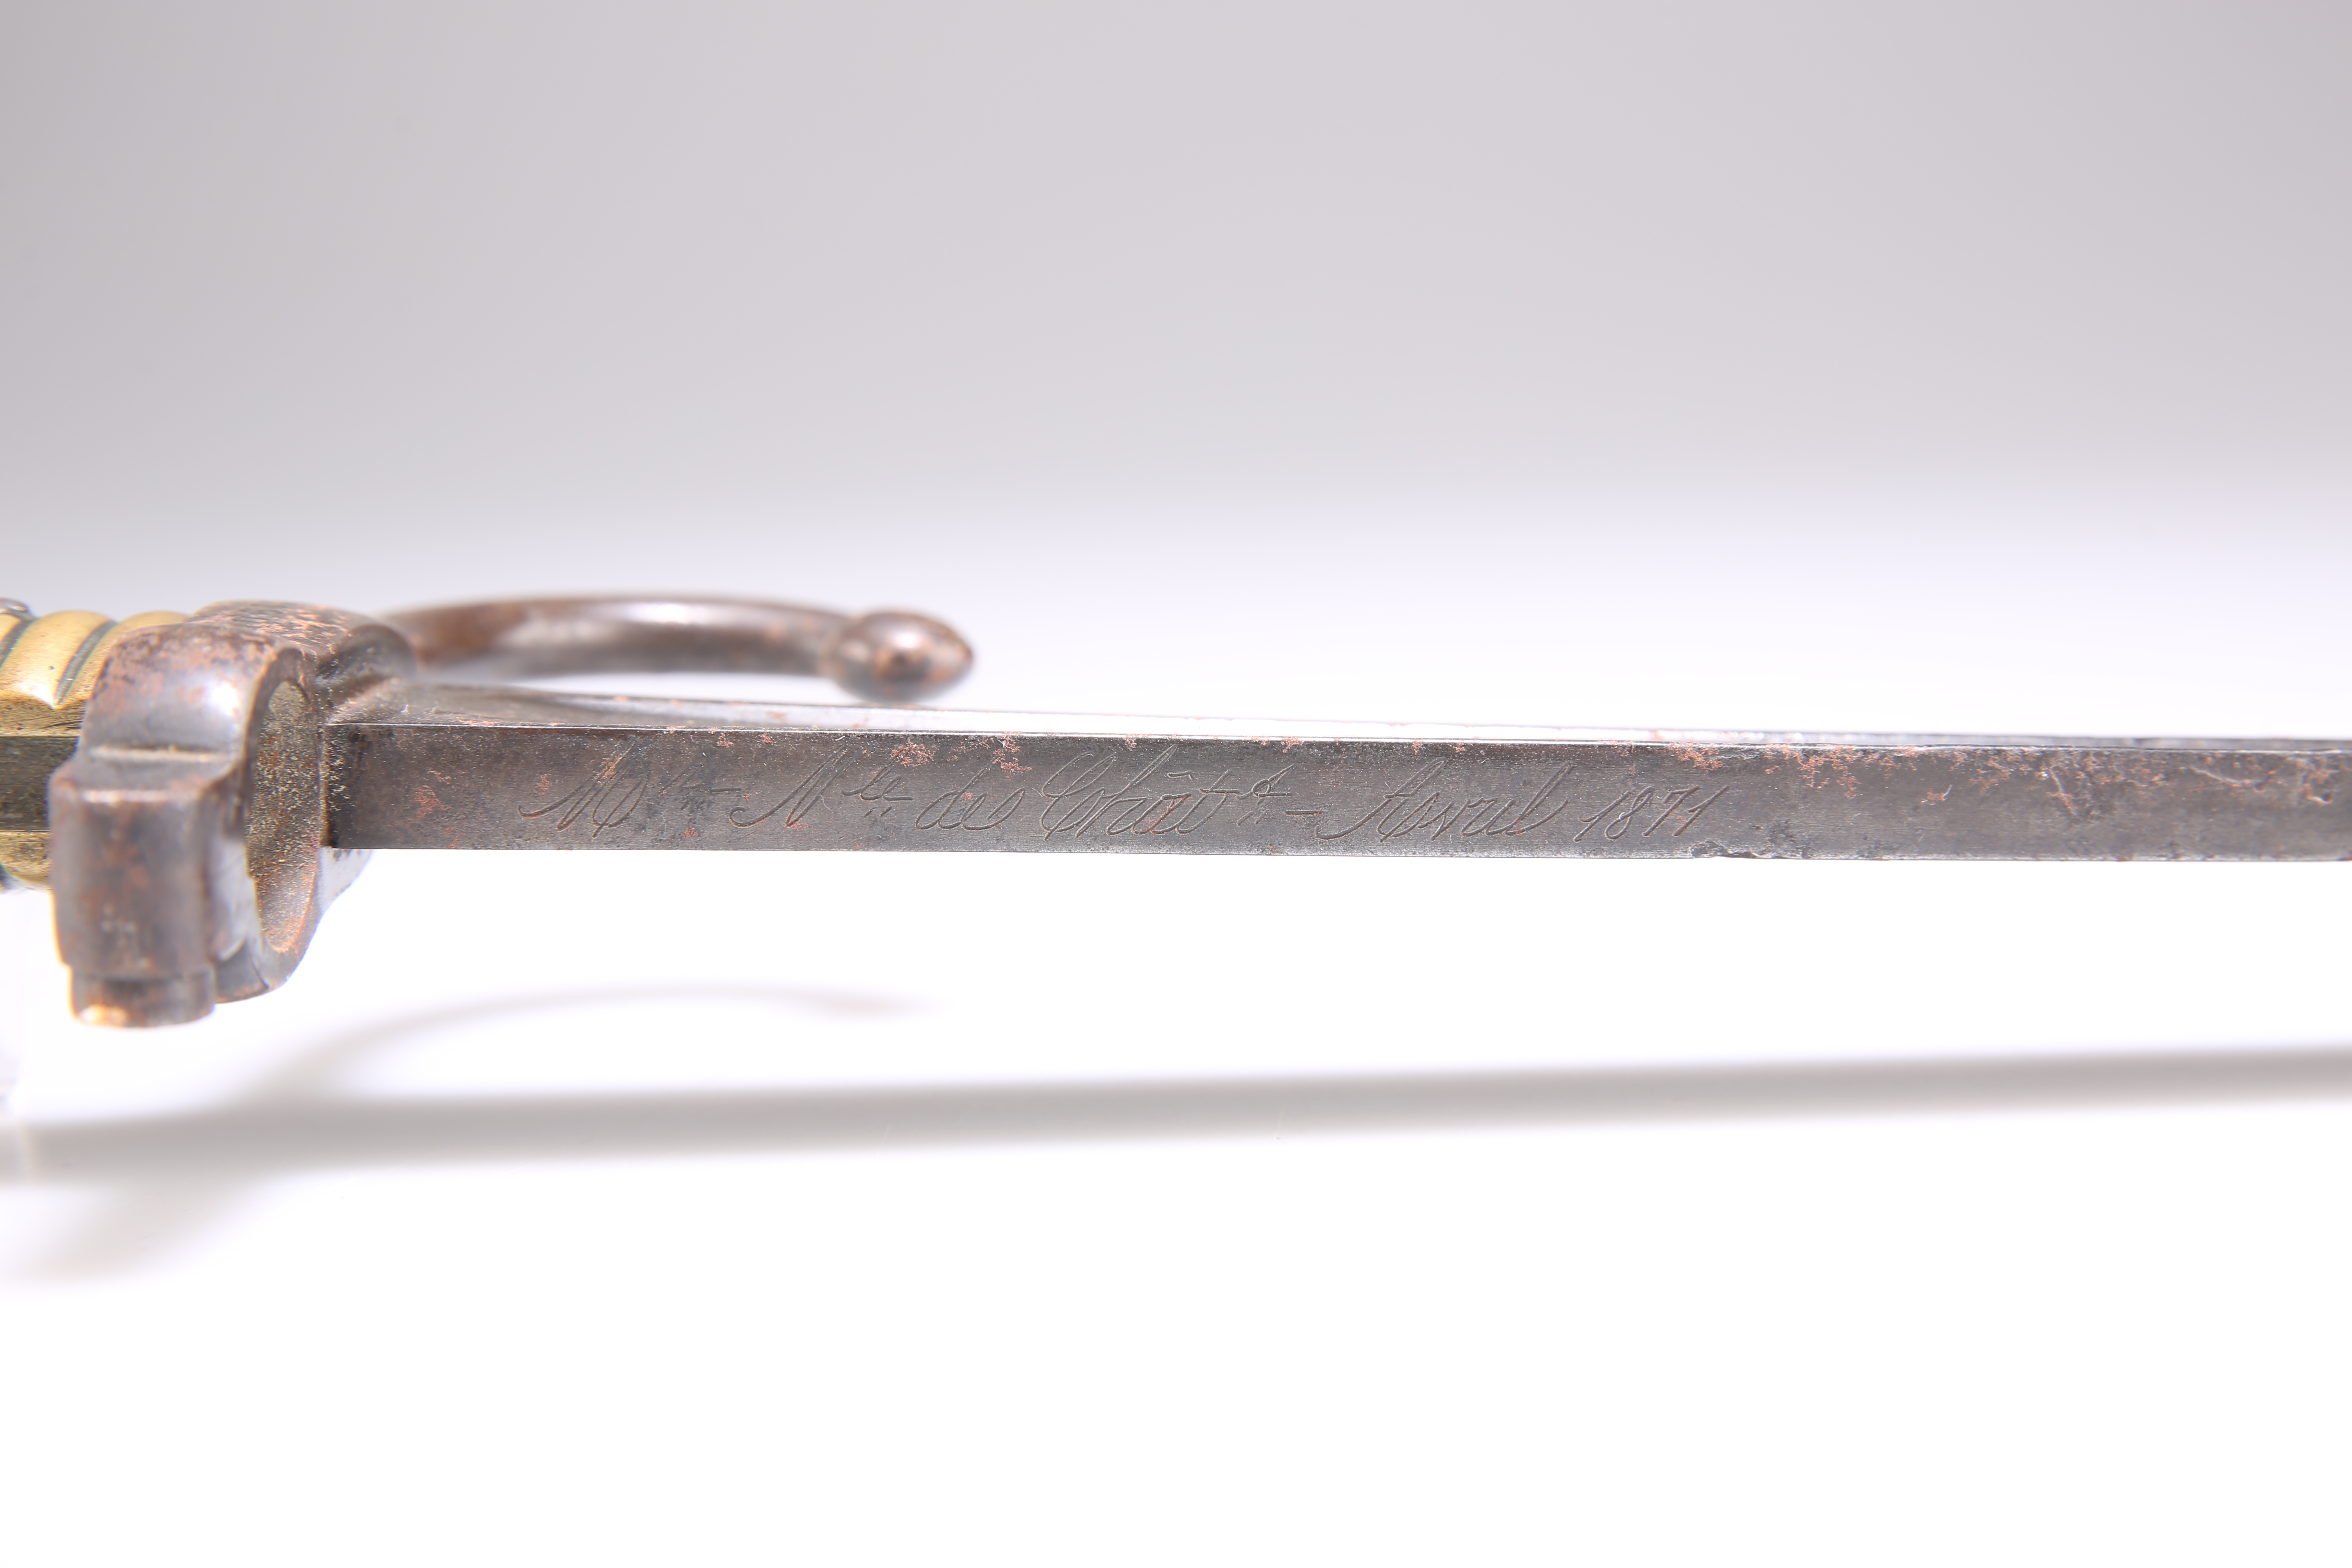 A FRENCH 19TH CENTURY INFANTRY BAYONET - Image 3 of 3